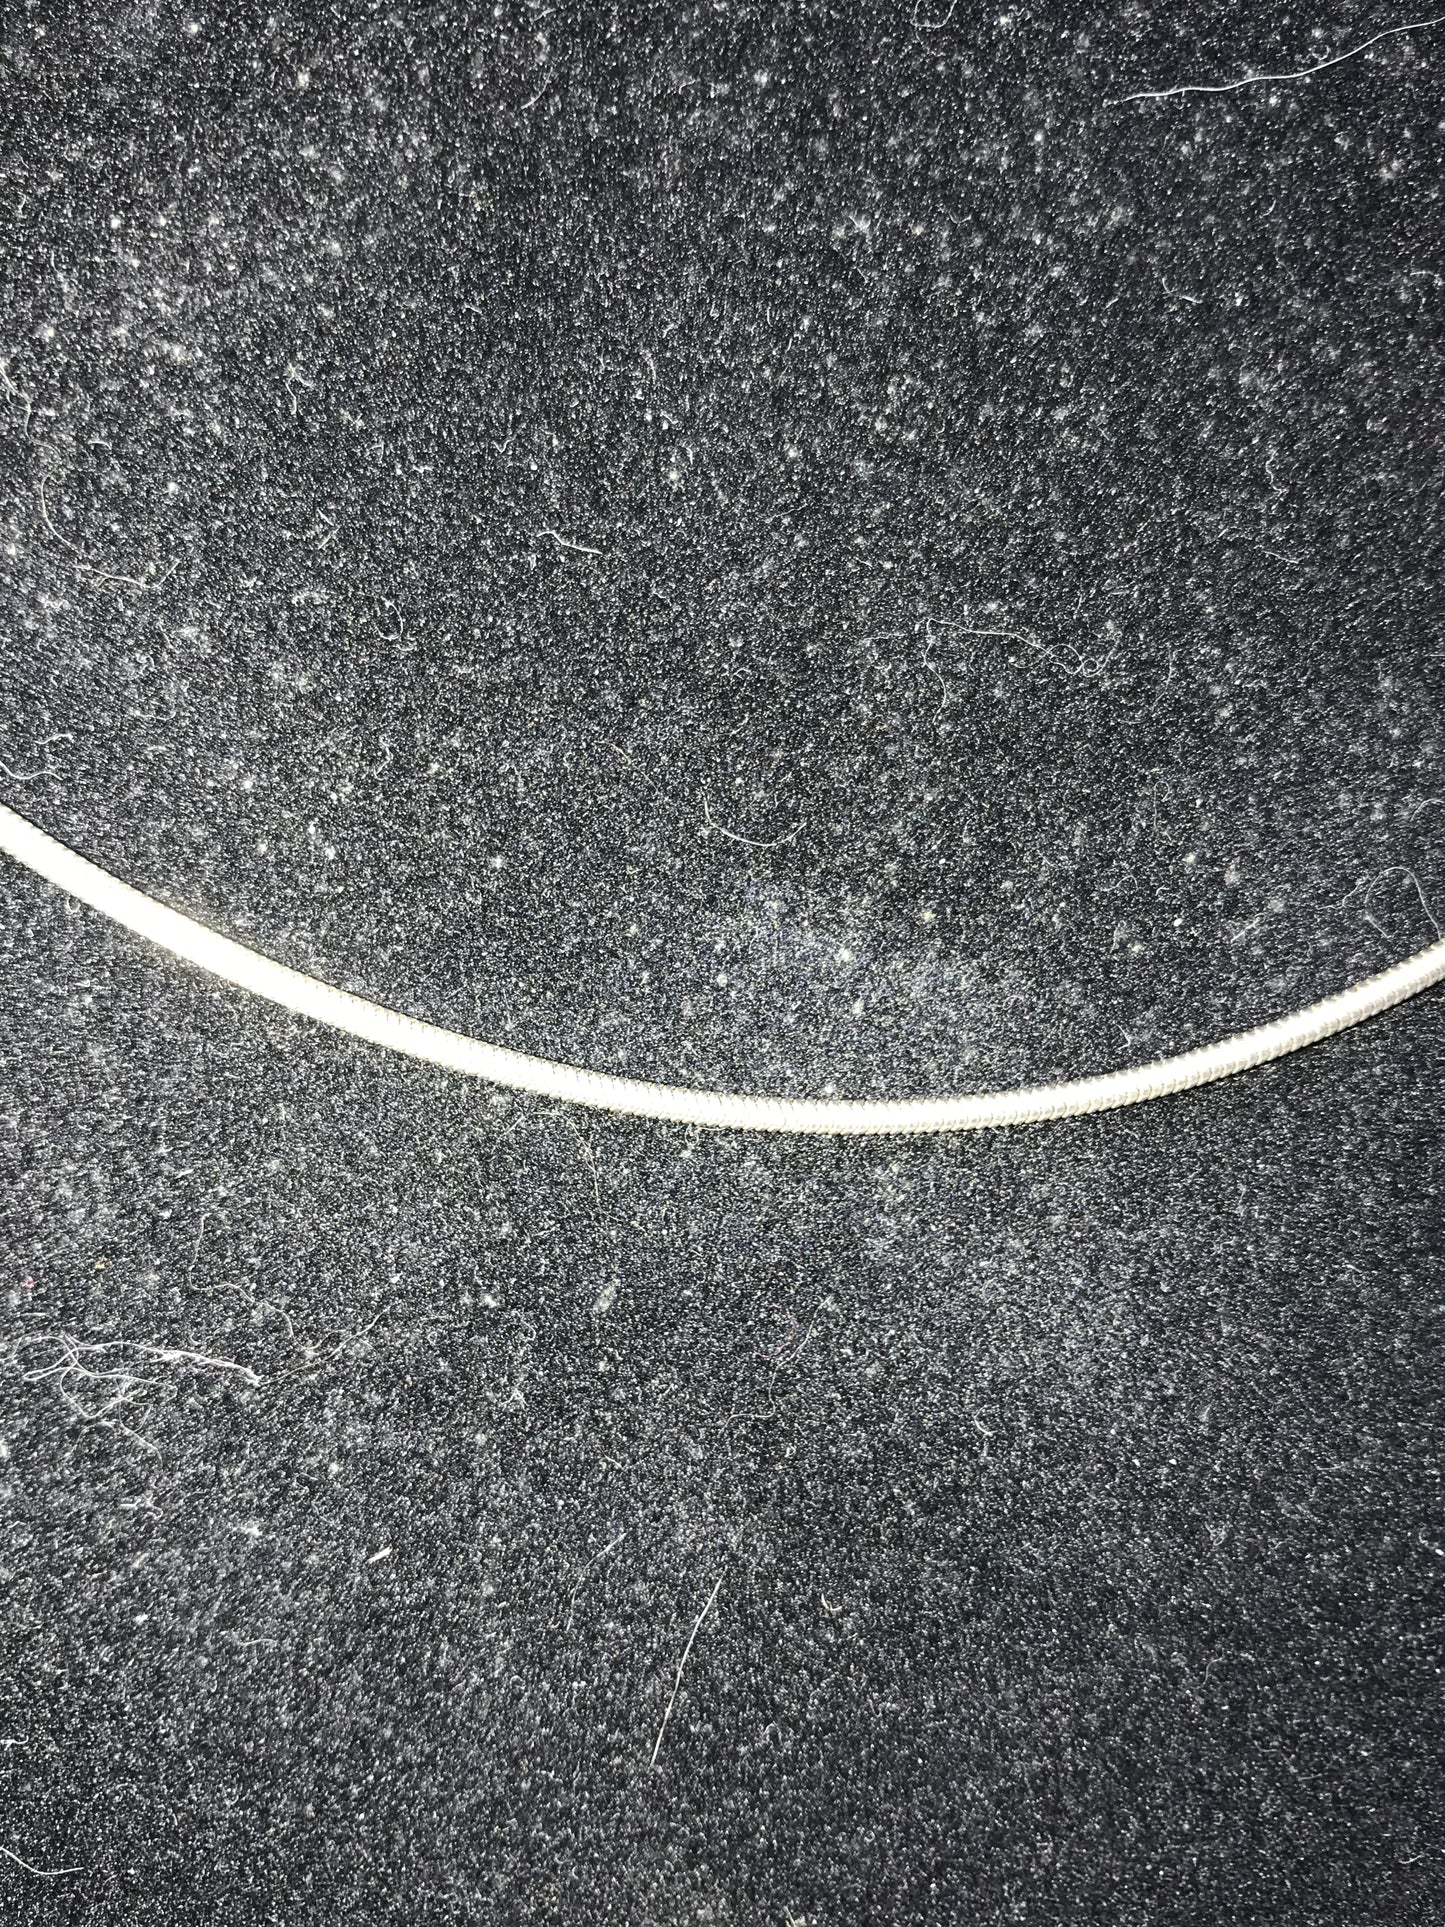 17" 2mm Pewter Snake Chain Necklace